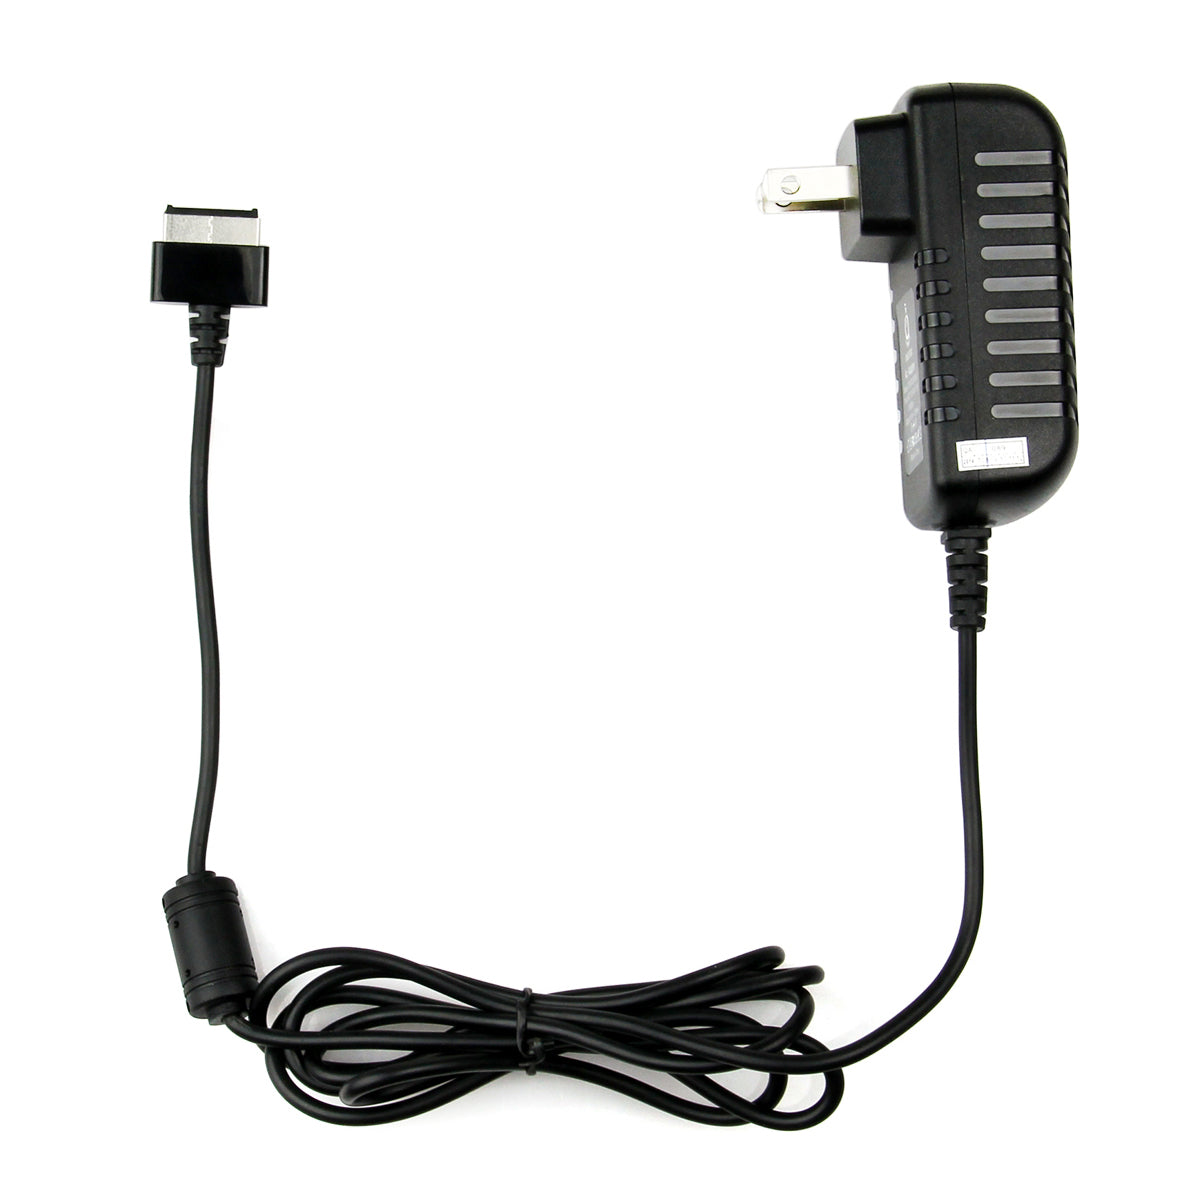 AC Adapter Charger for ASUS Eee Pad Transformer TF201.